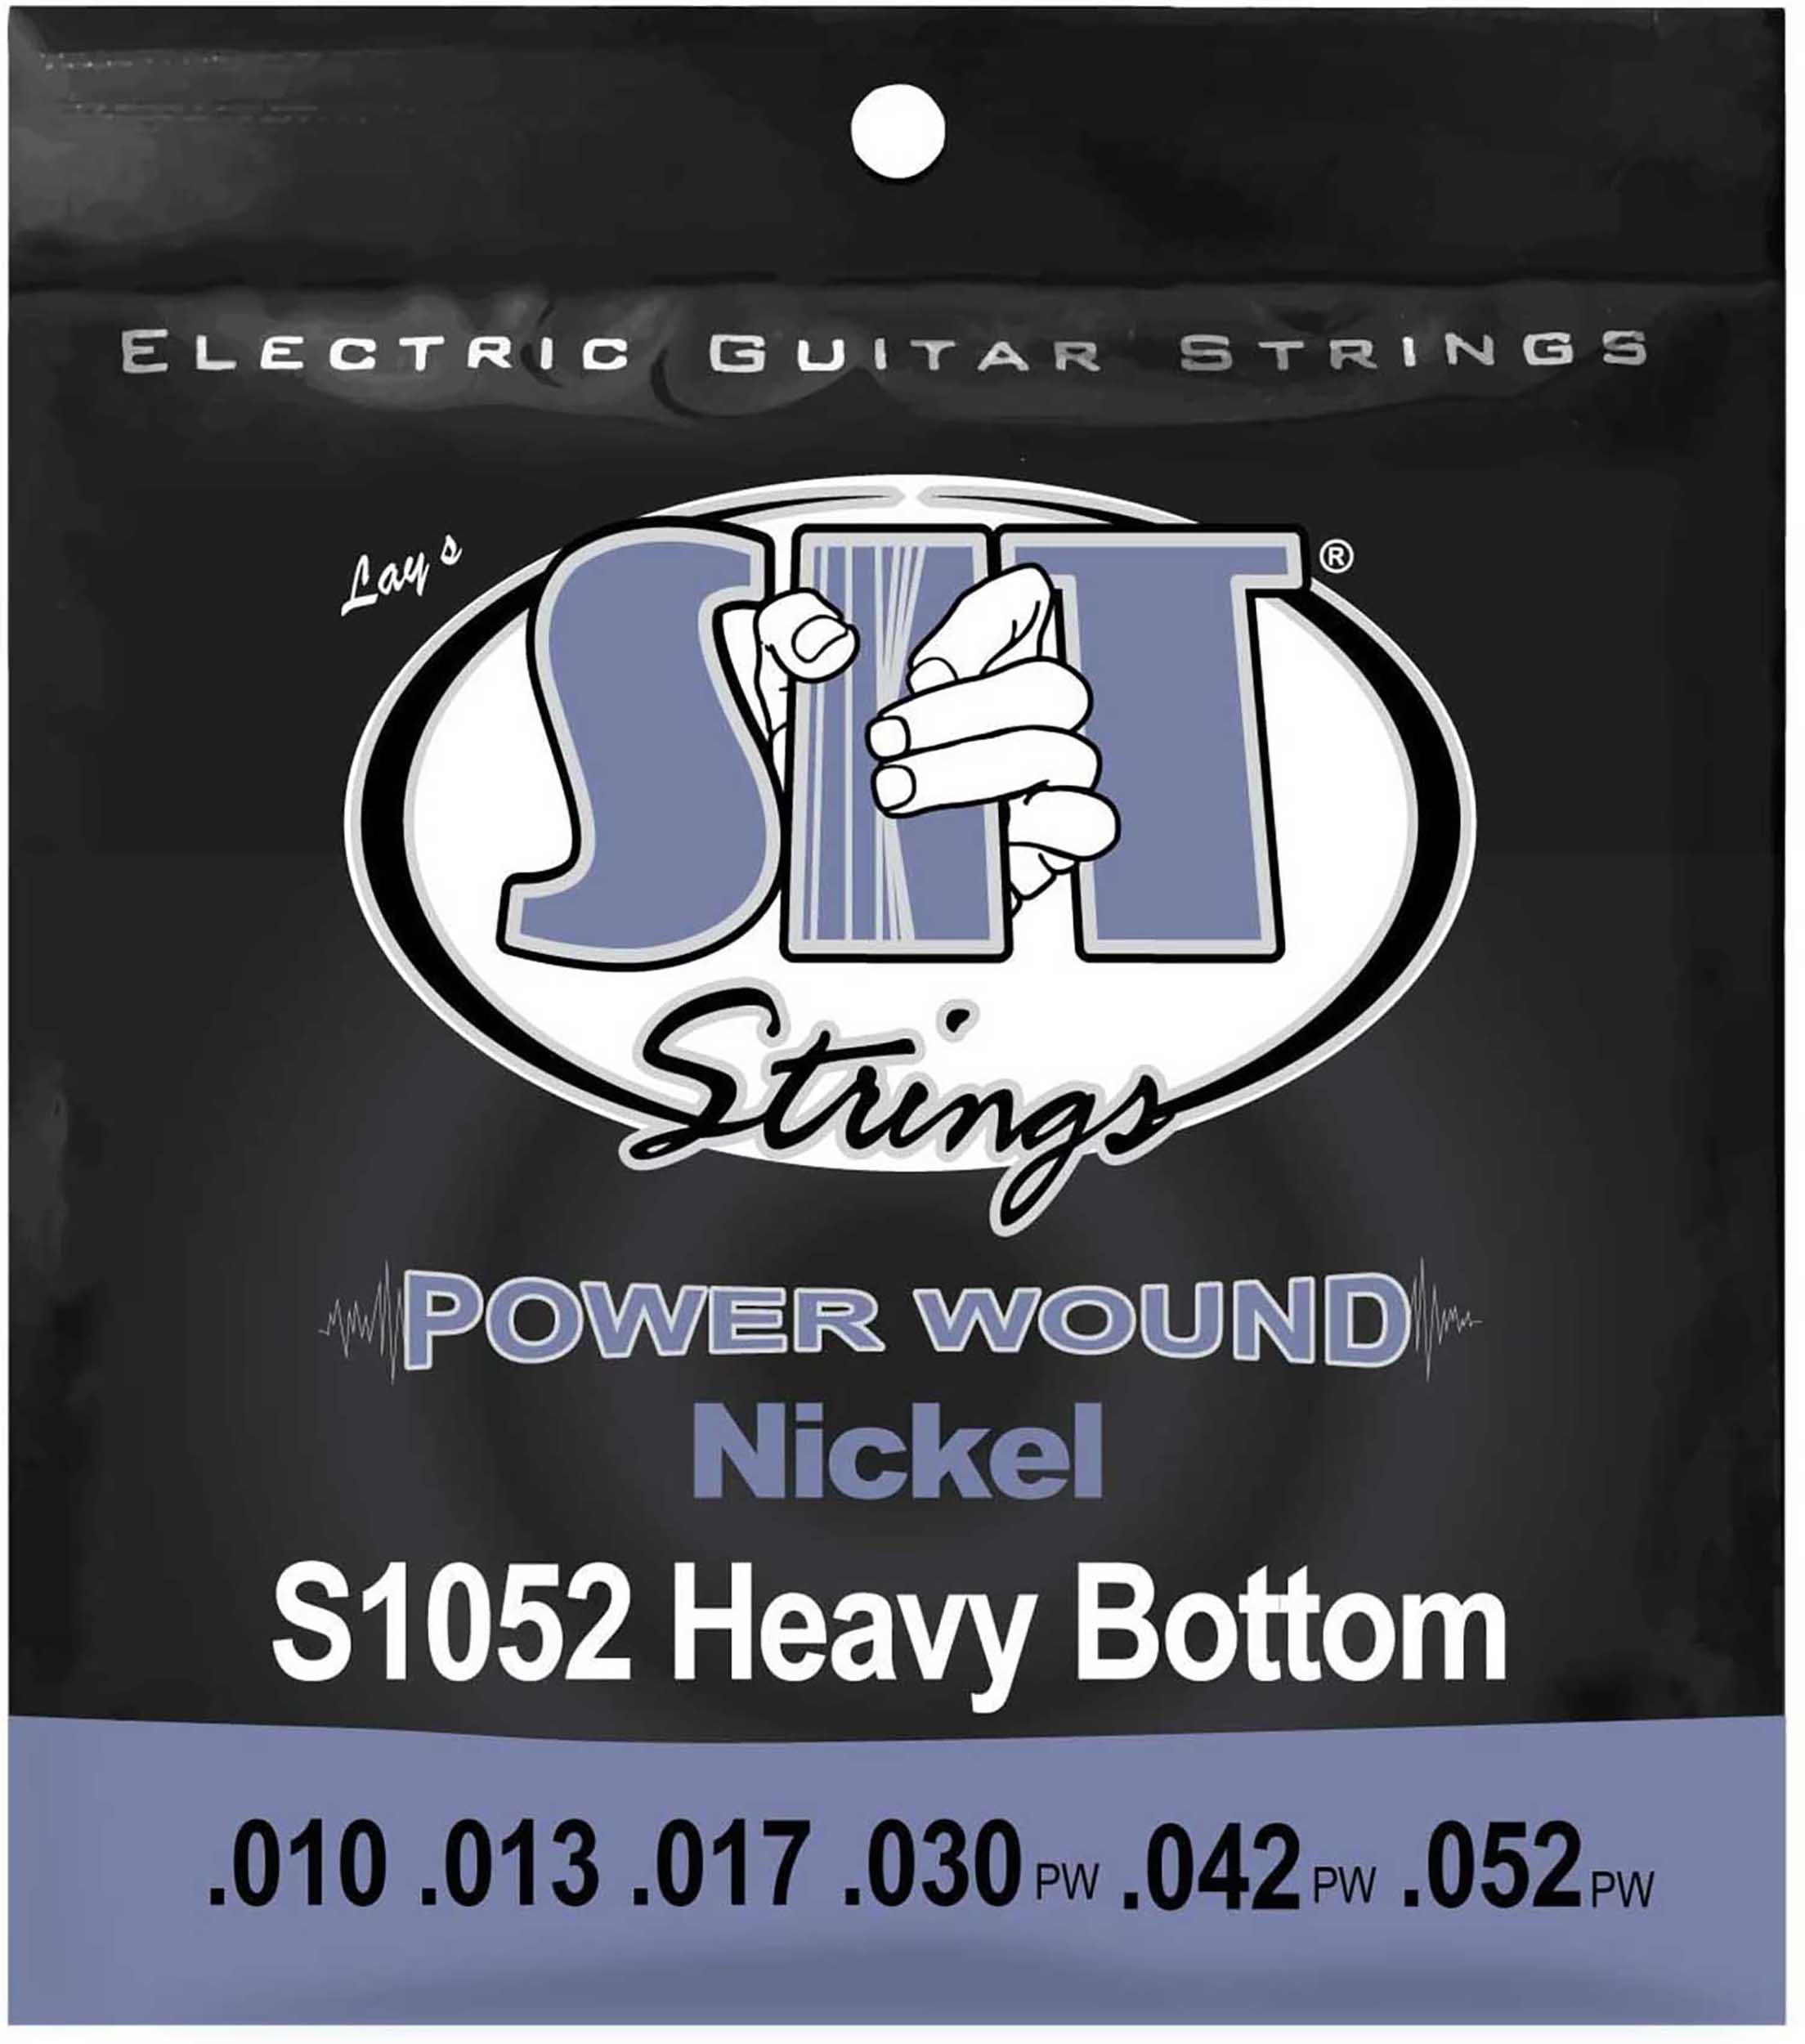 S.I.T. String S1052, Heavy Bottom Power Wound Nickel Electric Guitar String by SIT Strings